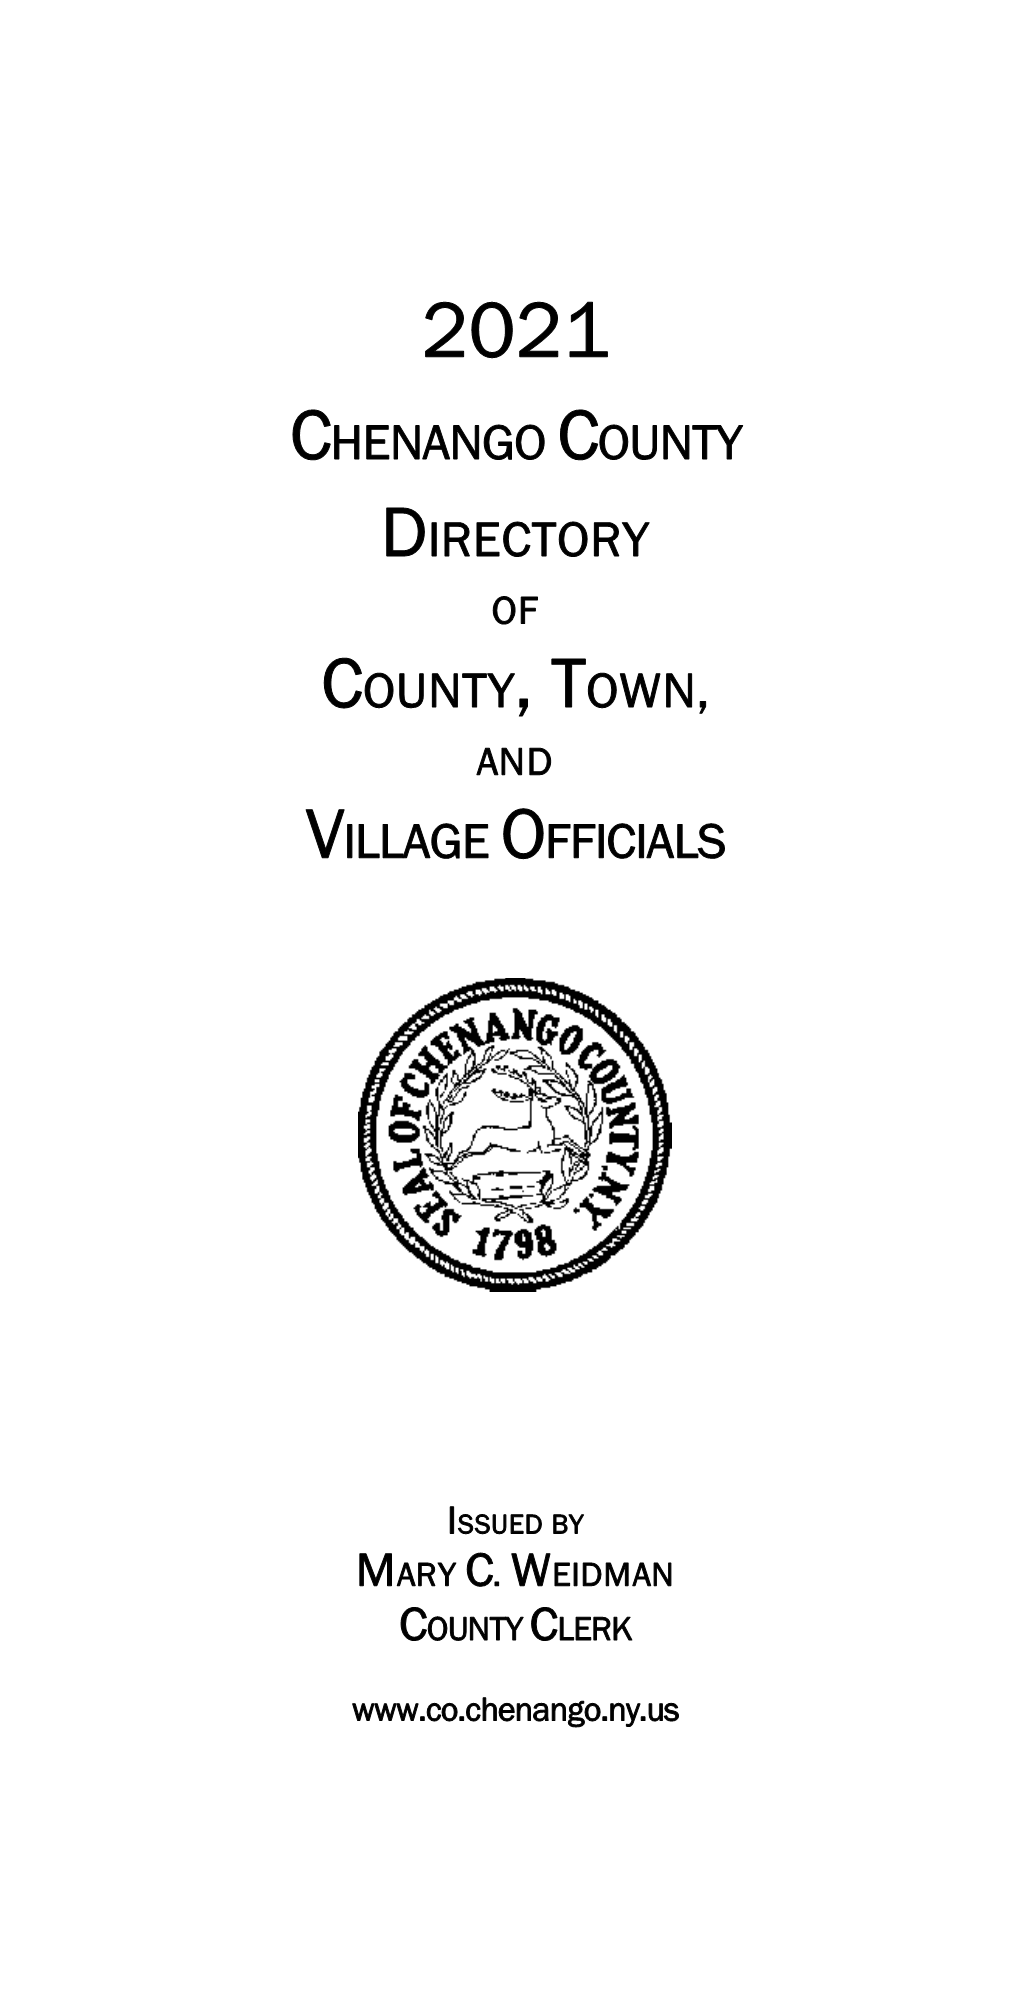 Chenango County Directory County, Town, Village Officials